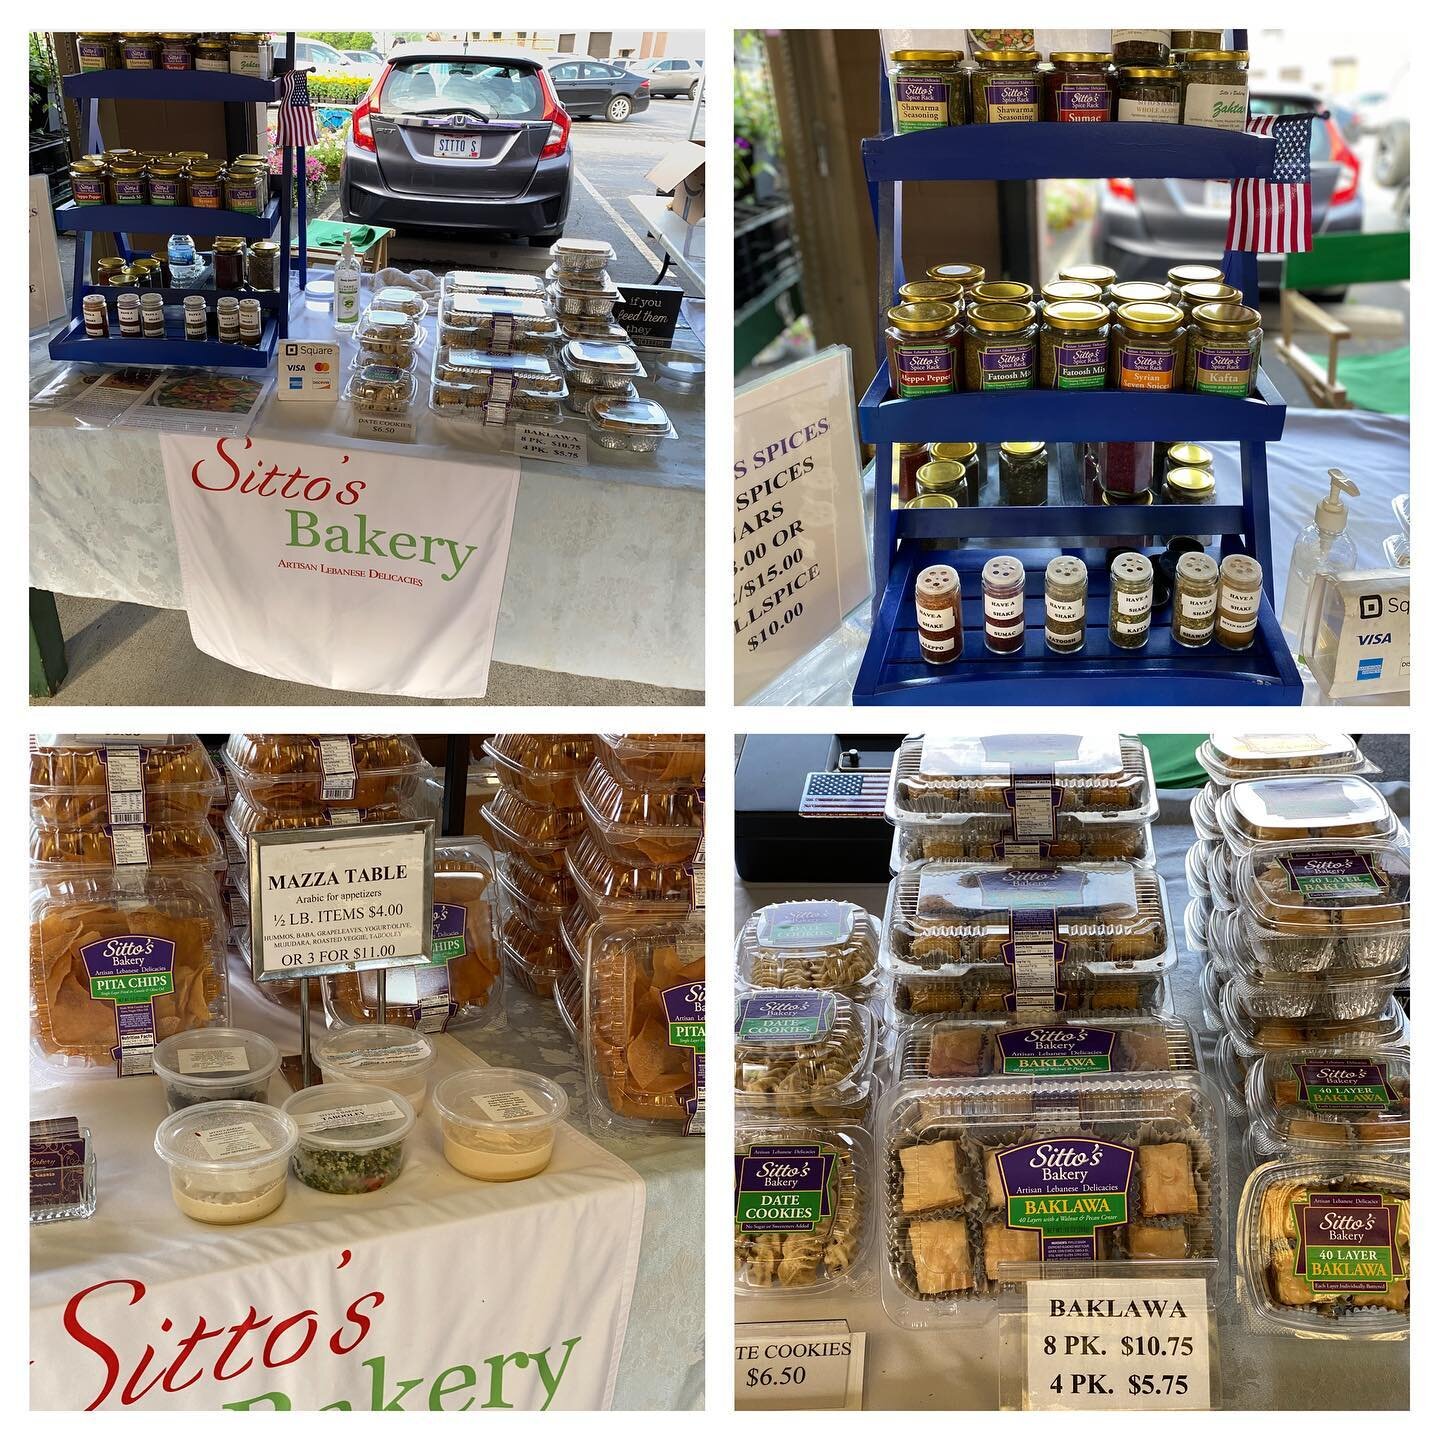 Wednesday Westgate Farmers Market!  Chuck is set up in our old familiar spot.  Blueberry Banana bread is back!  Stock up on spices, .  Got hummus? We do just for you!3pm - 7pm.  @toledofarmersmarket